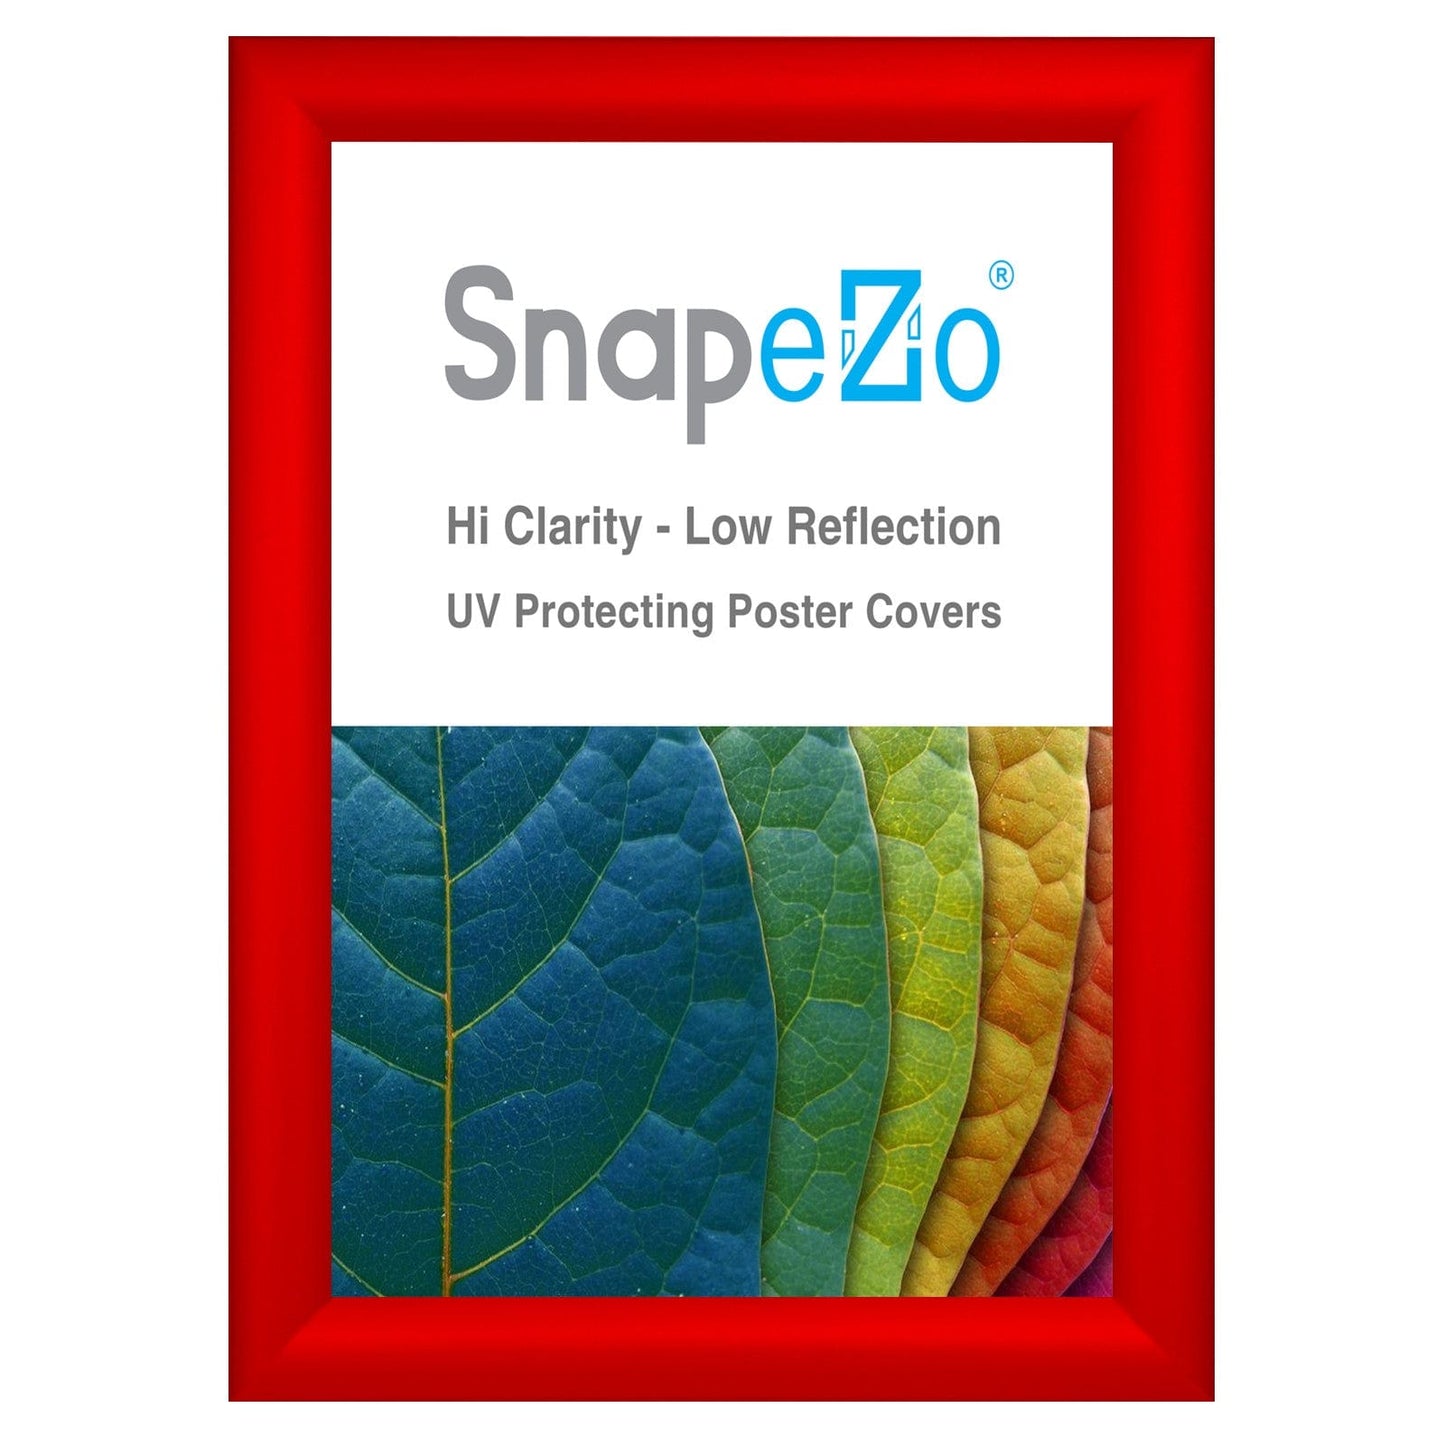 8x10 Red SnapeZo® Snap Frame - 1.2" Profile - Snap Frames Direct